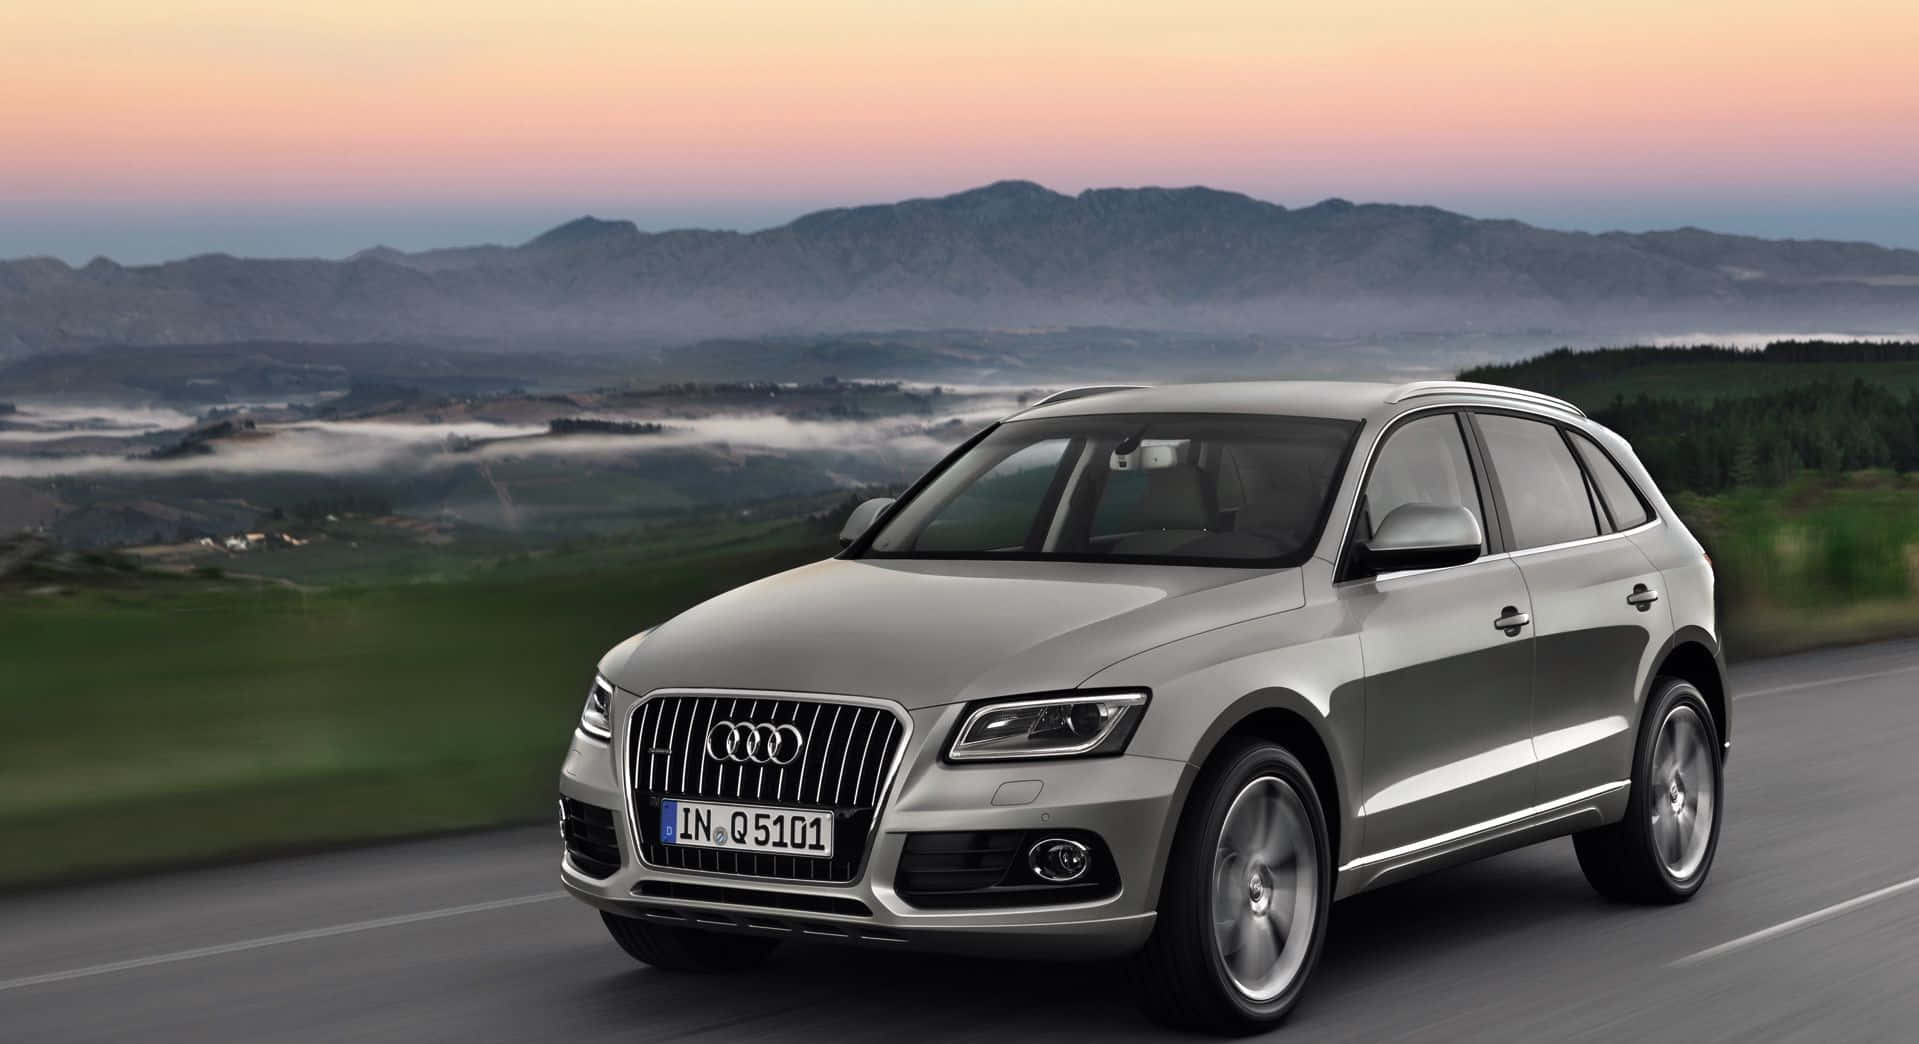 Stylish And Luxurious Audi Q5 In Vibrant Cityscape Wallpaper